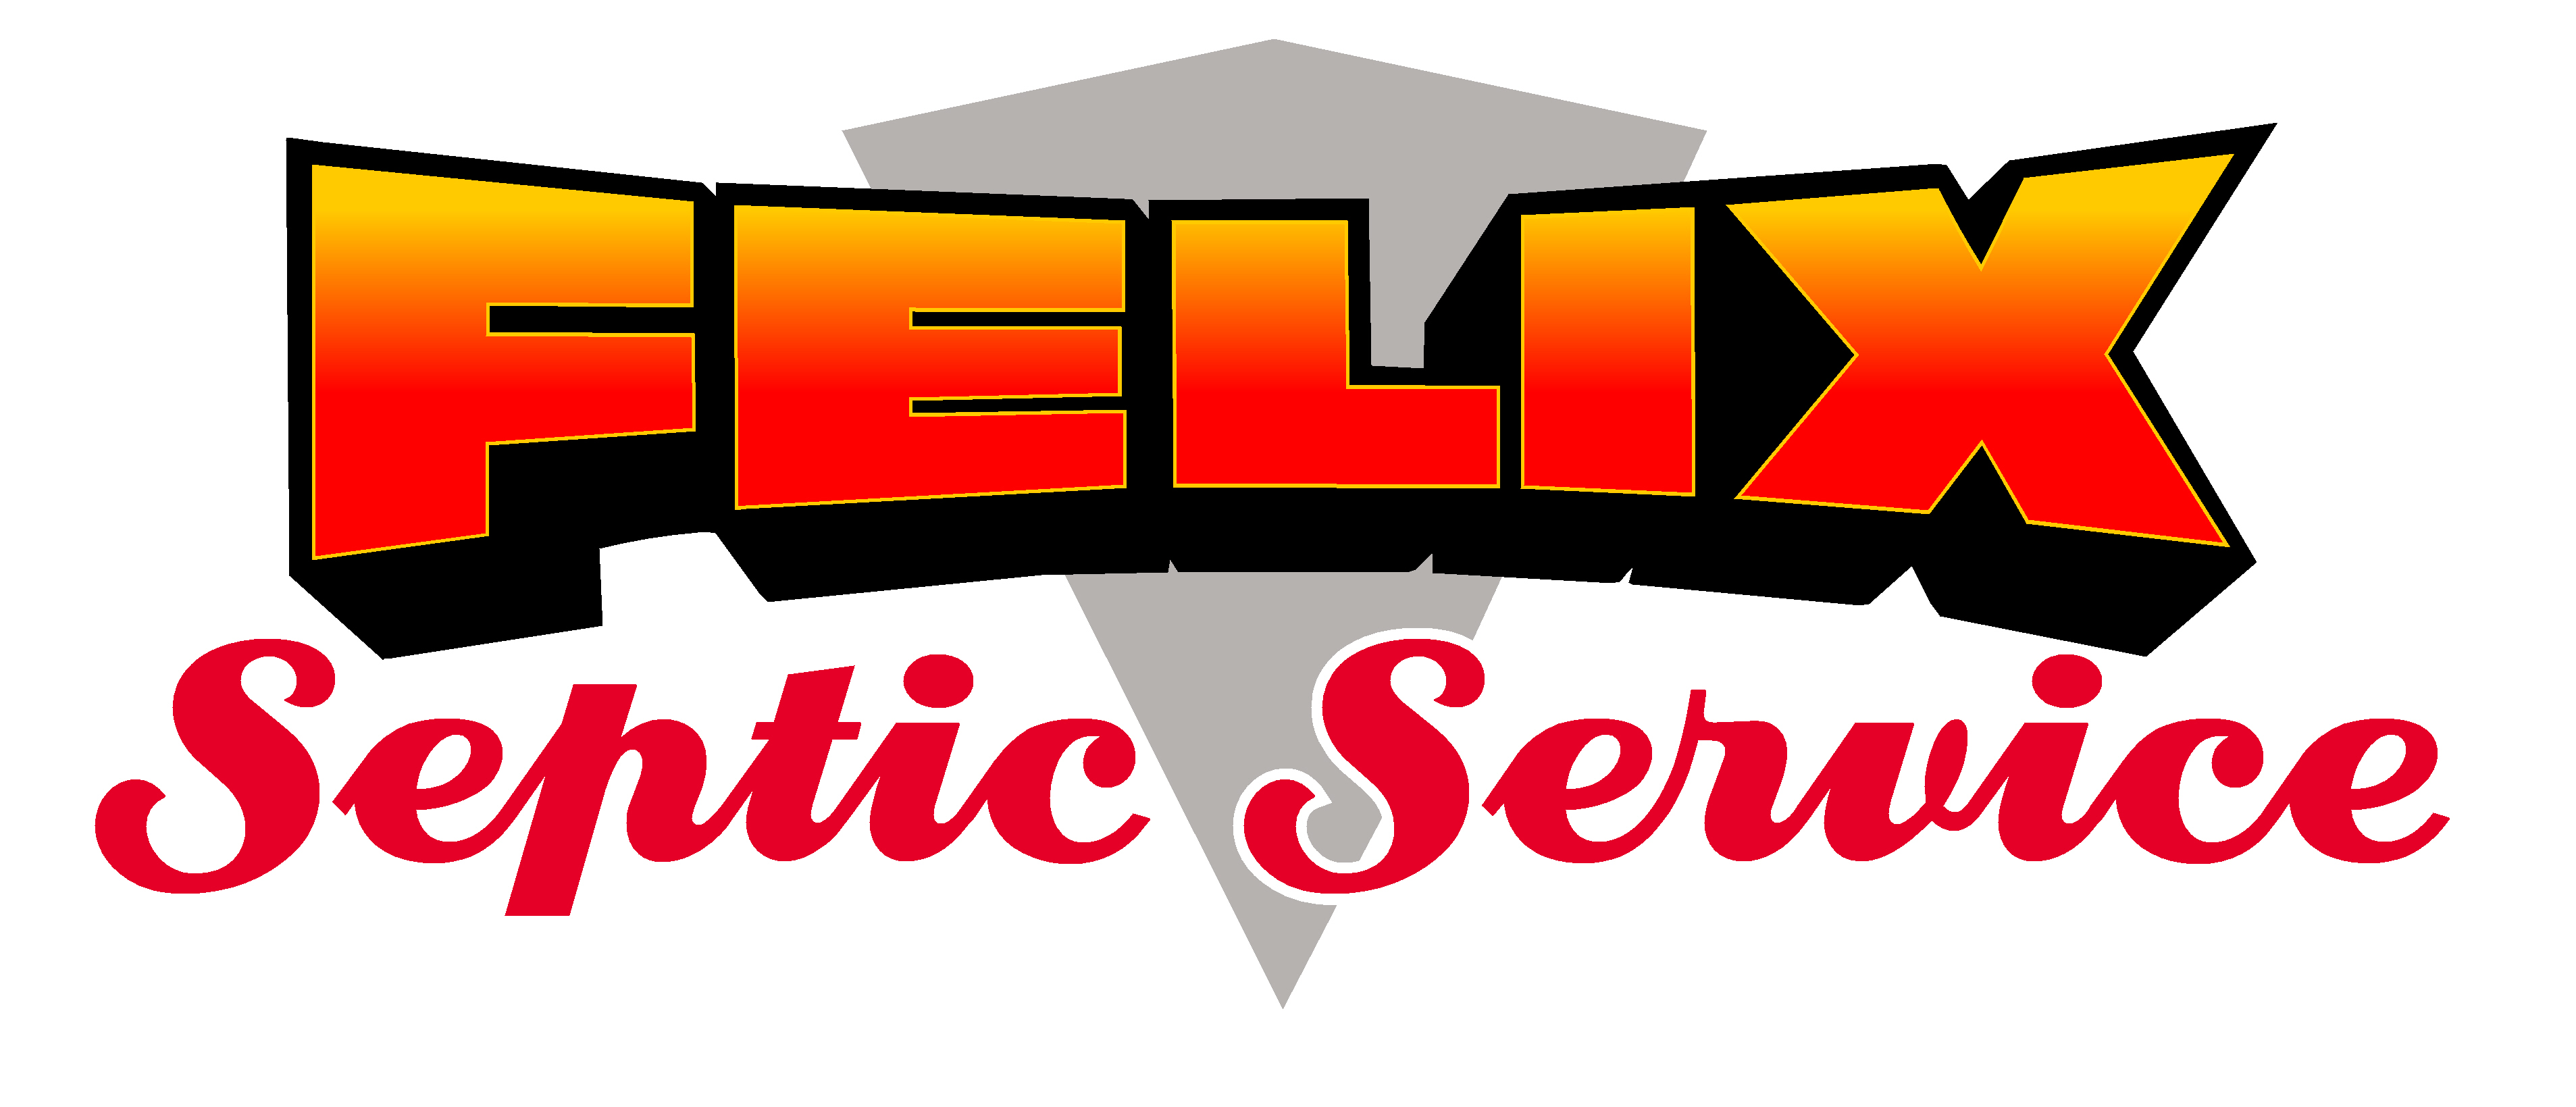 Felix Septic Service          Septic System Inspection Report